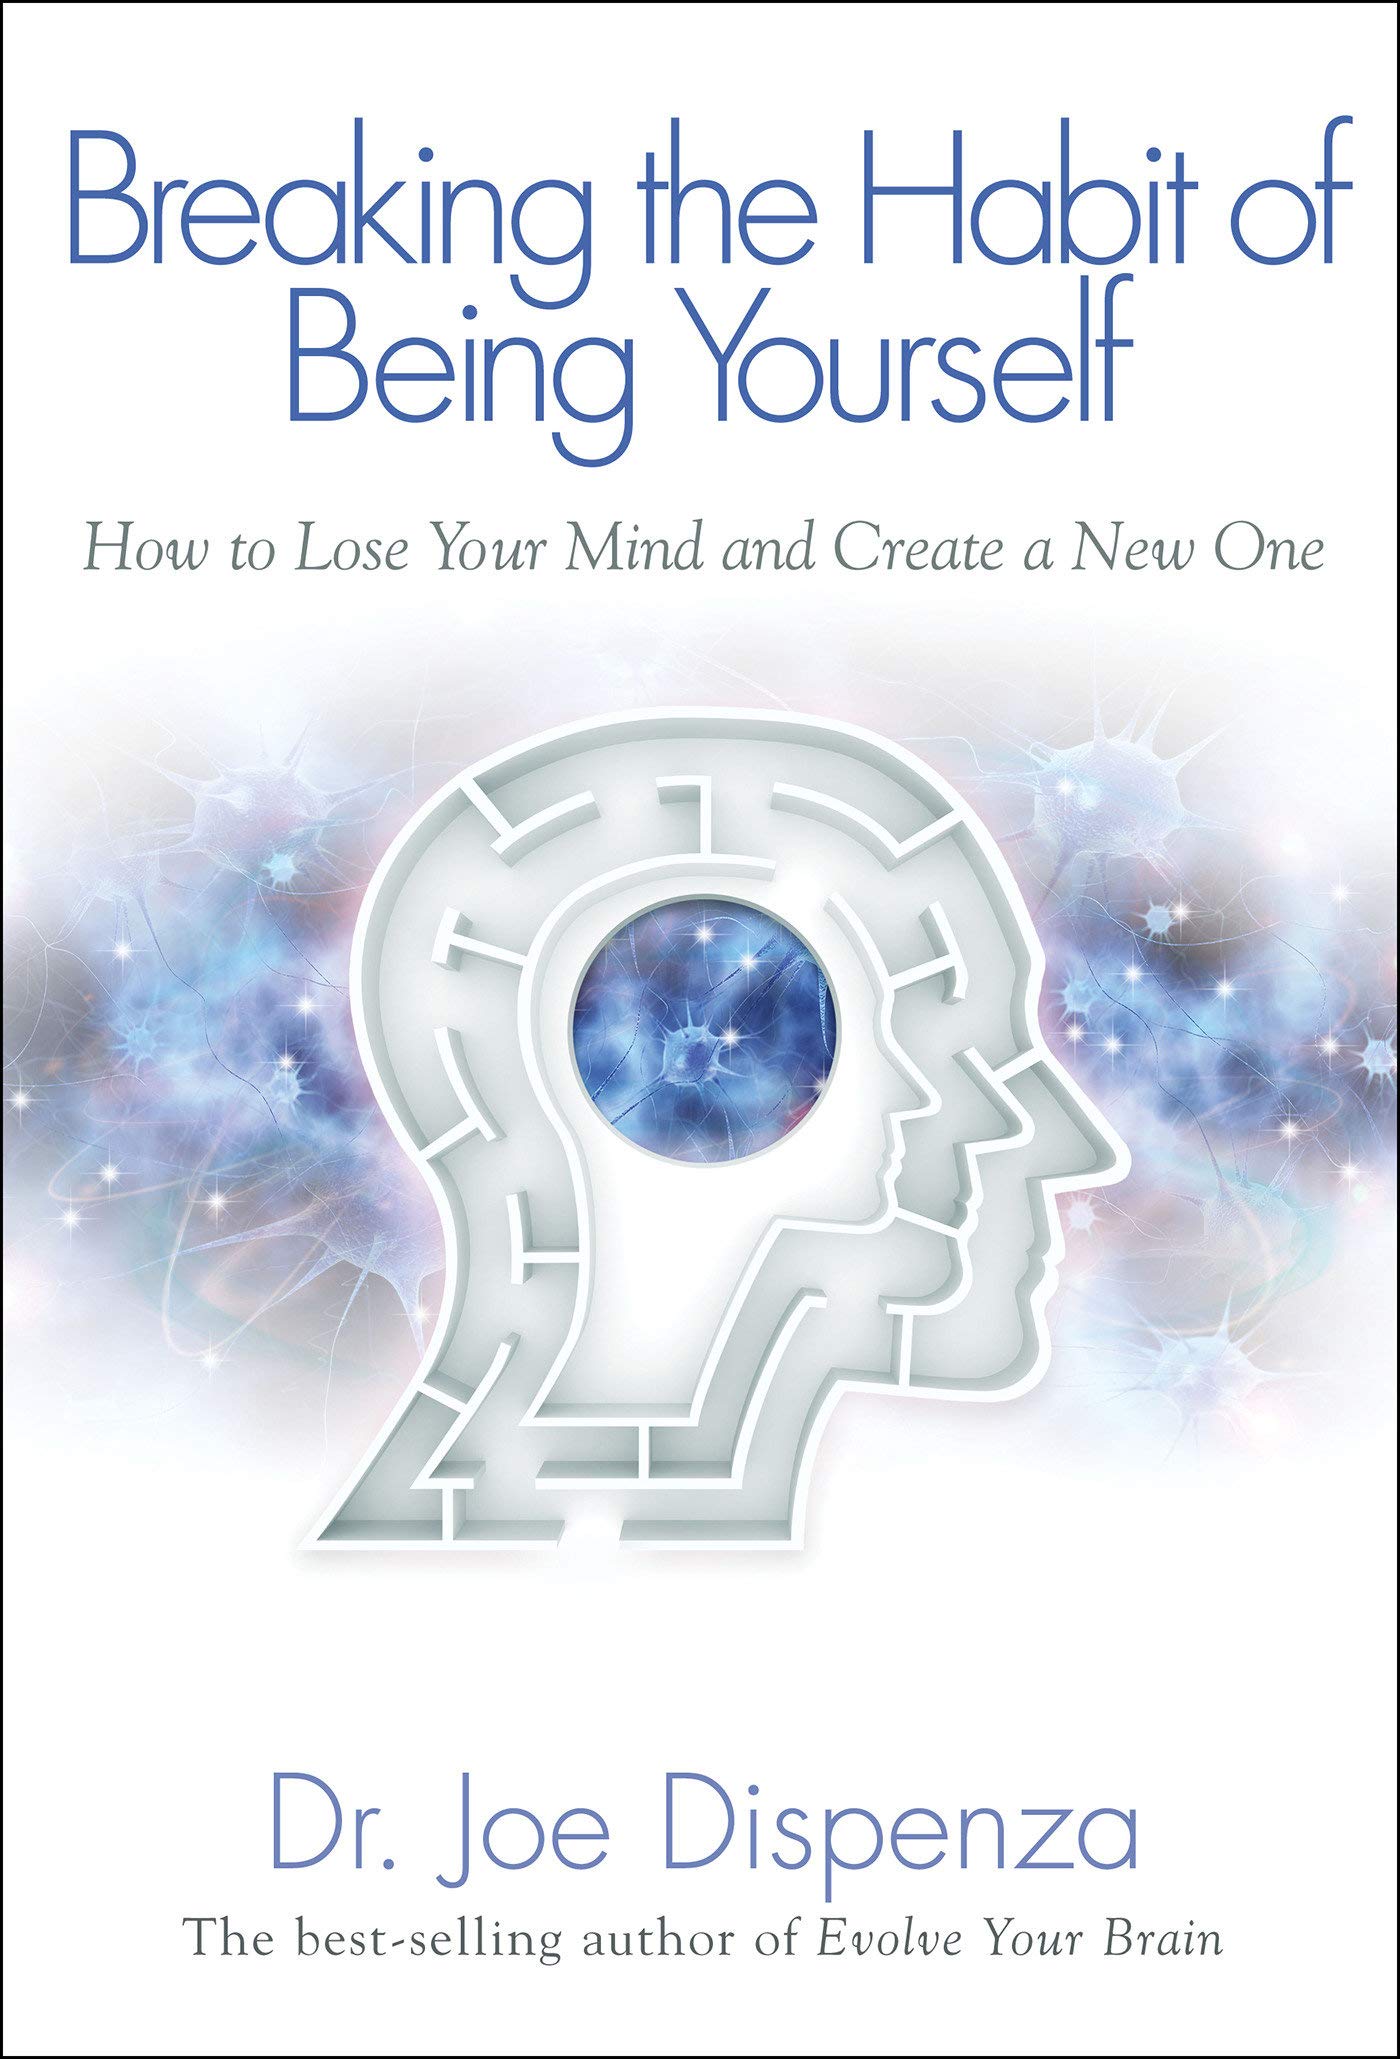 Breaking The Habit of Being Yourself: How to Lose Your Mind and Create a New One (Copy) (Copy)